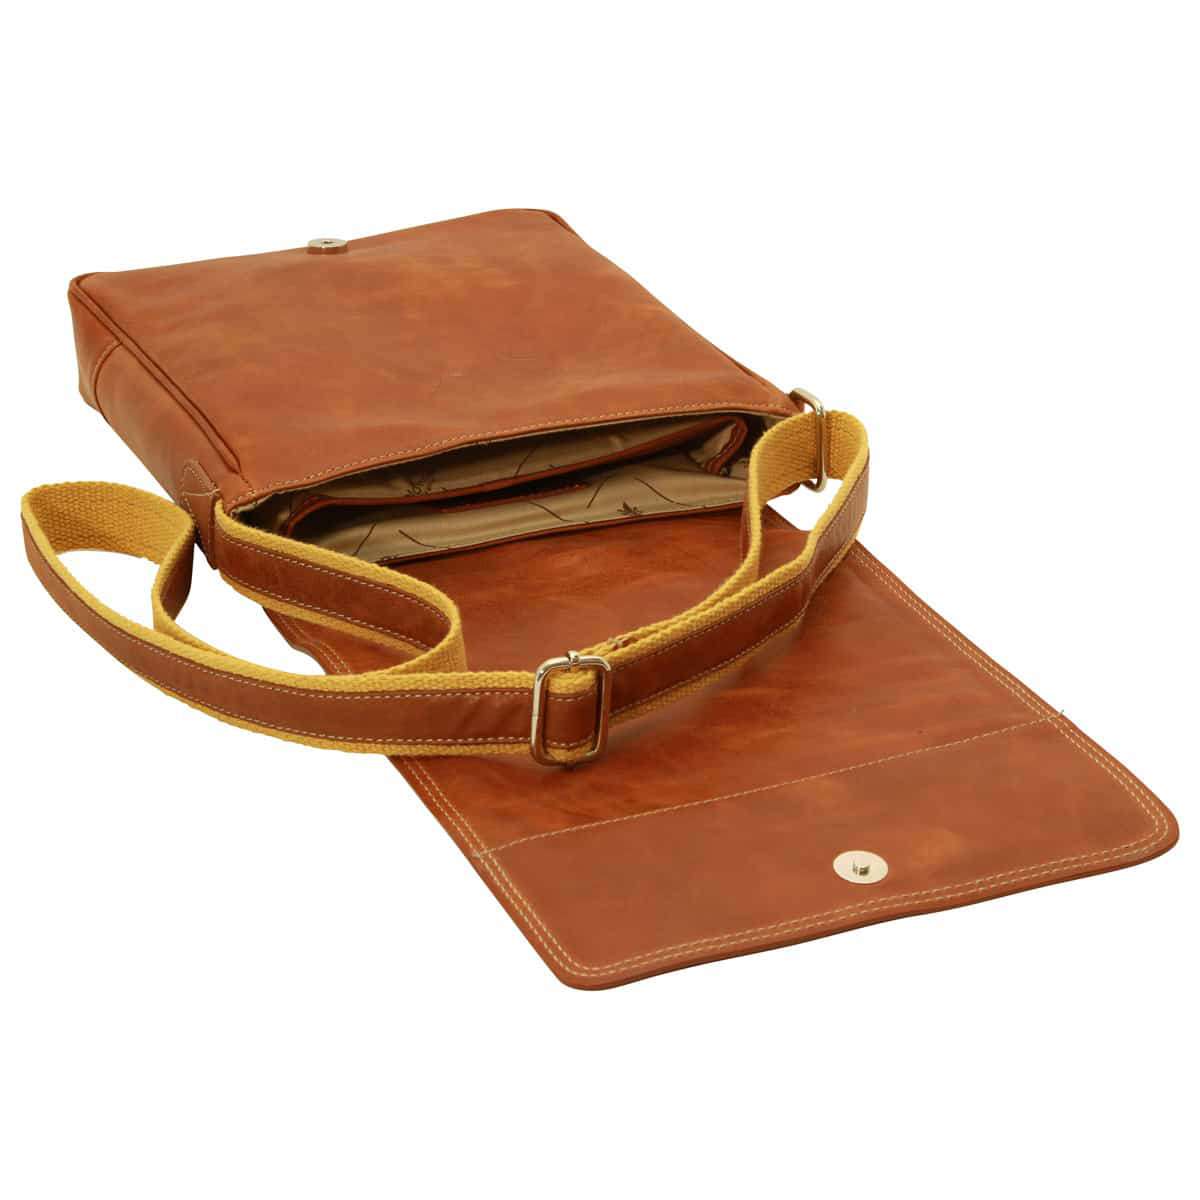 Leather I-Pad bag - Brown Colonial | 087361CO US | Old Angler Firenze